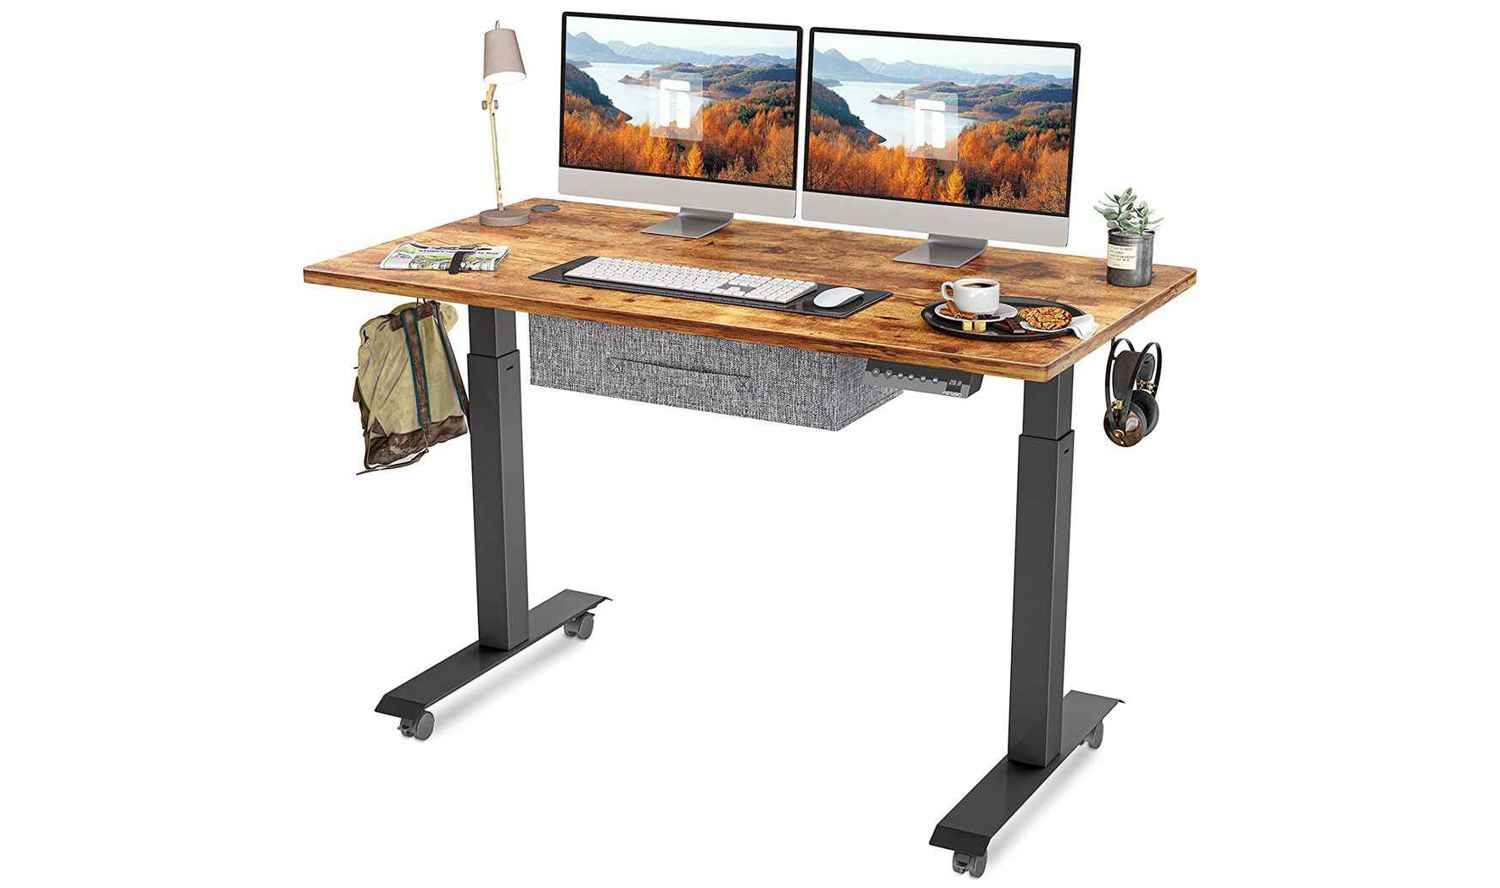 The NetDigz Editors rate the FEZIBO Electric as the Best Standing Desk for the money.